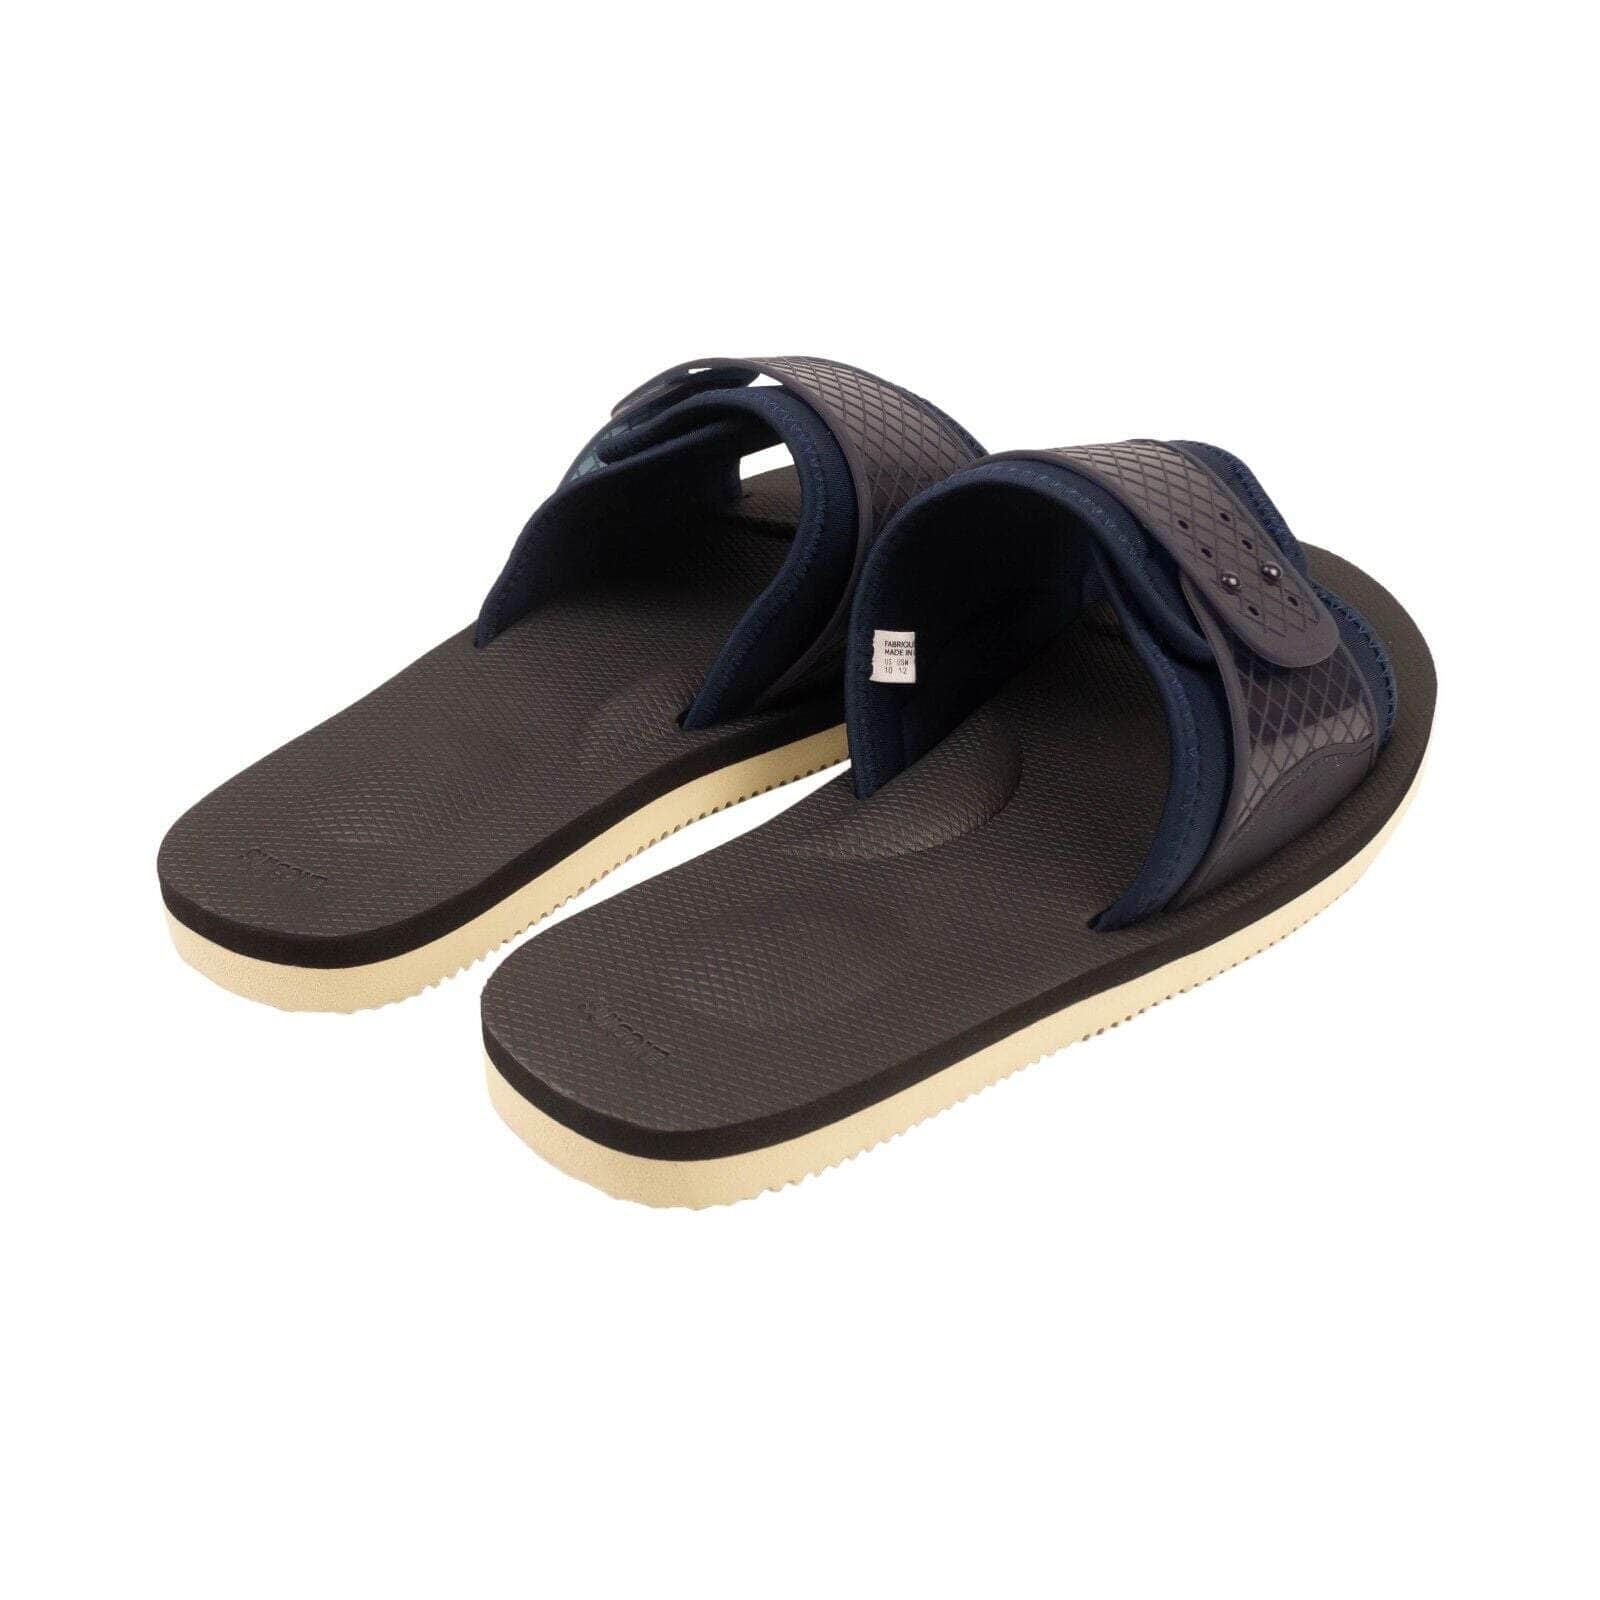 Suicoke channelenable-all, chicmi, couponcollection, gender-mens, main-shoes, mens-shoes, mens-slides-slippers, size-10, size-11, size-12, size-6, size-8, suicoke, under-250 Navy Blue SIV Slides